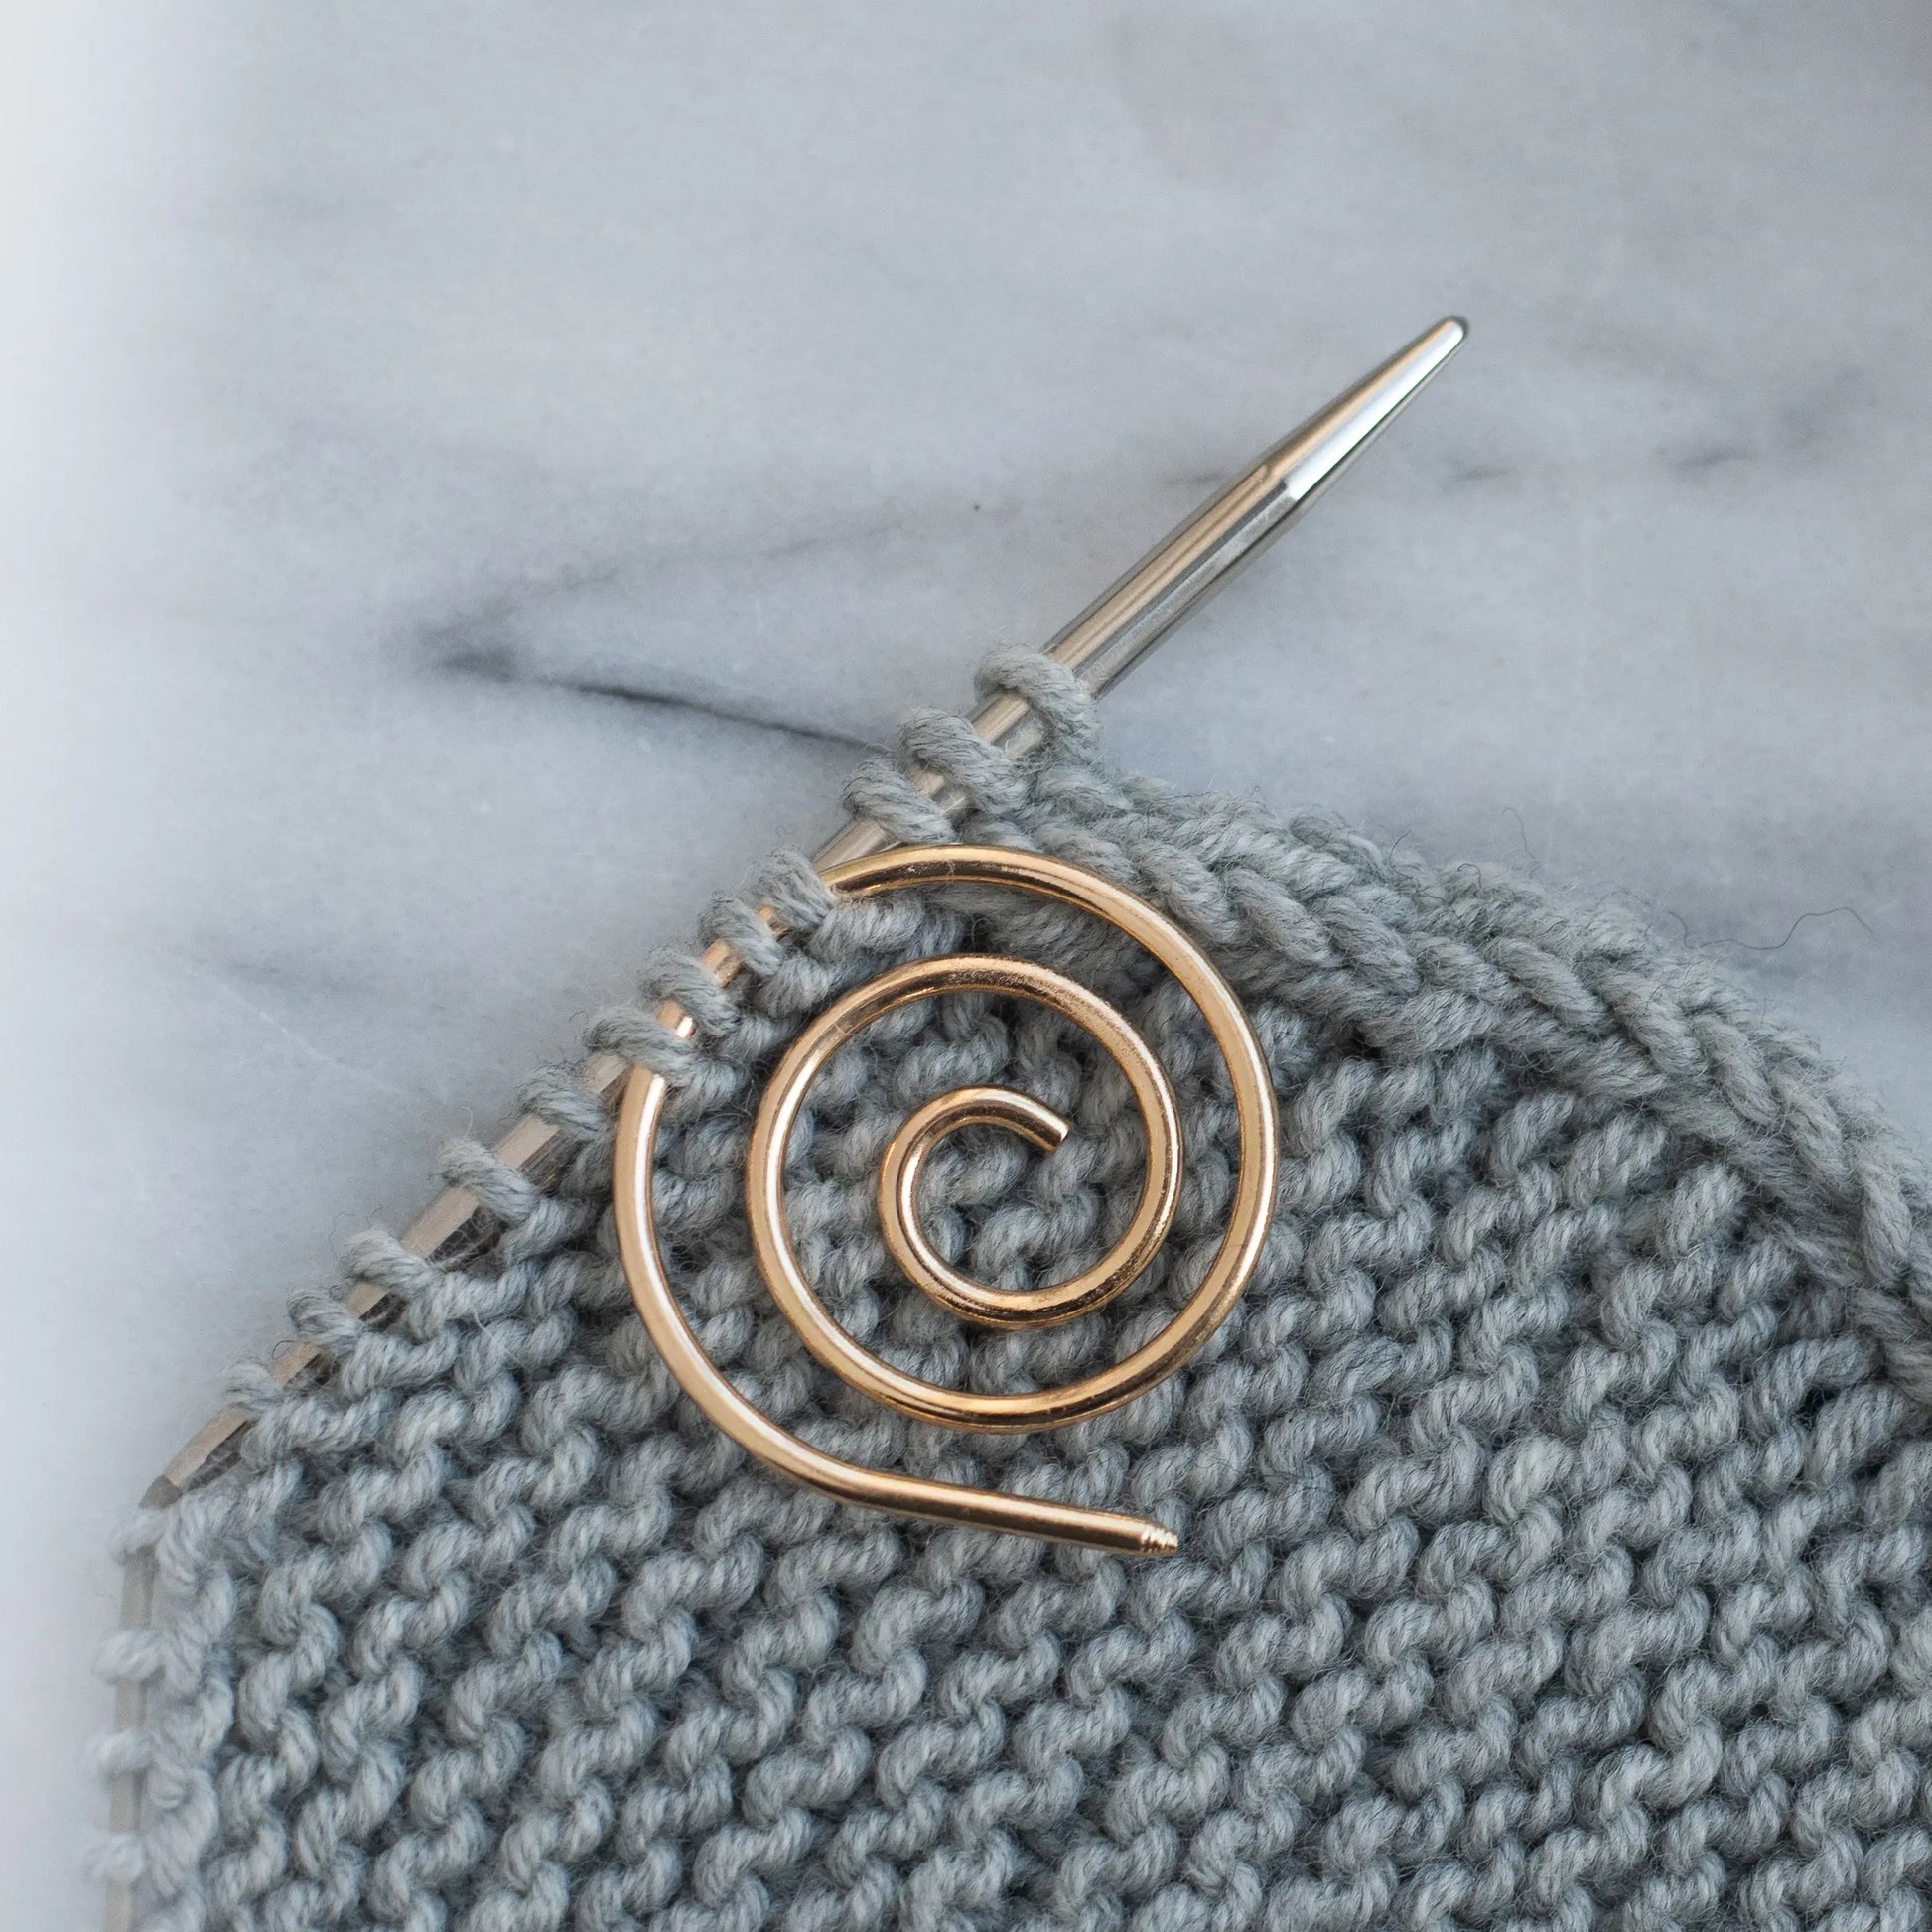 Spiral helping needle KNITS by cindy ekman